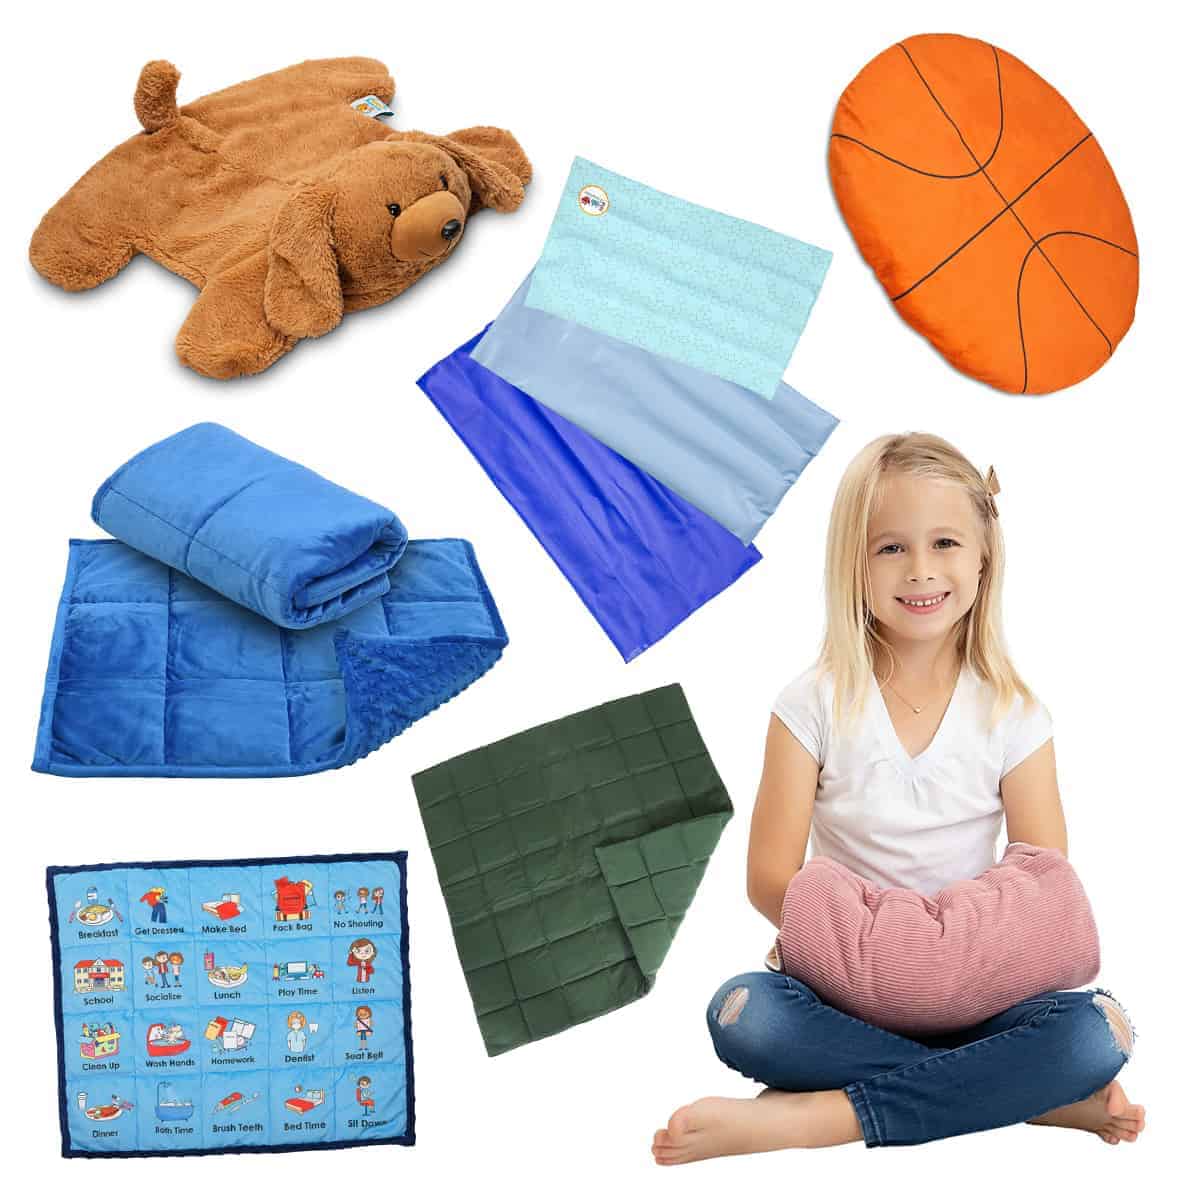 11 Fun Weighted Lap Pads to Help Kids Sit Still